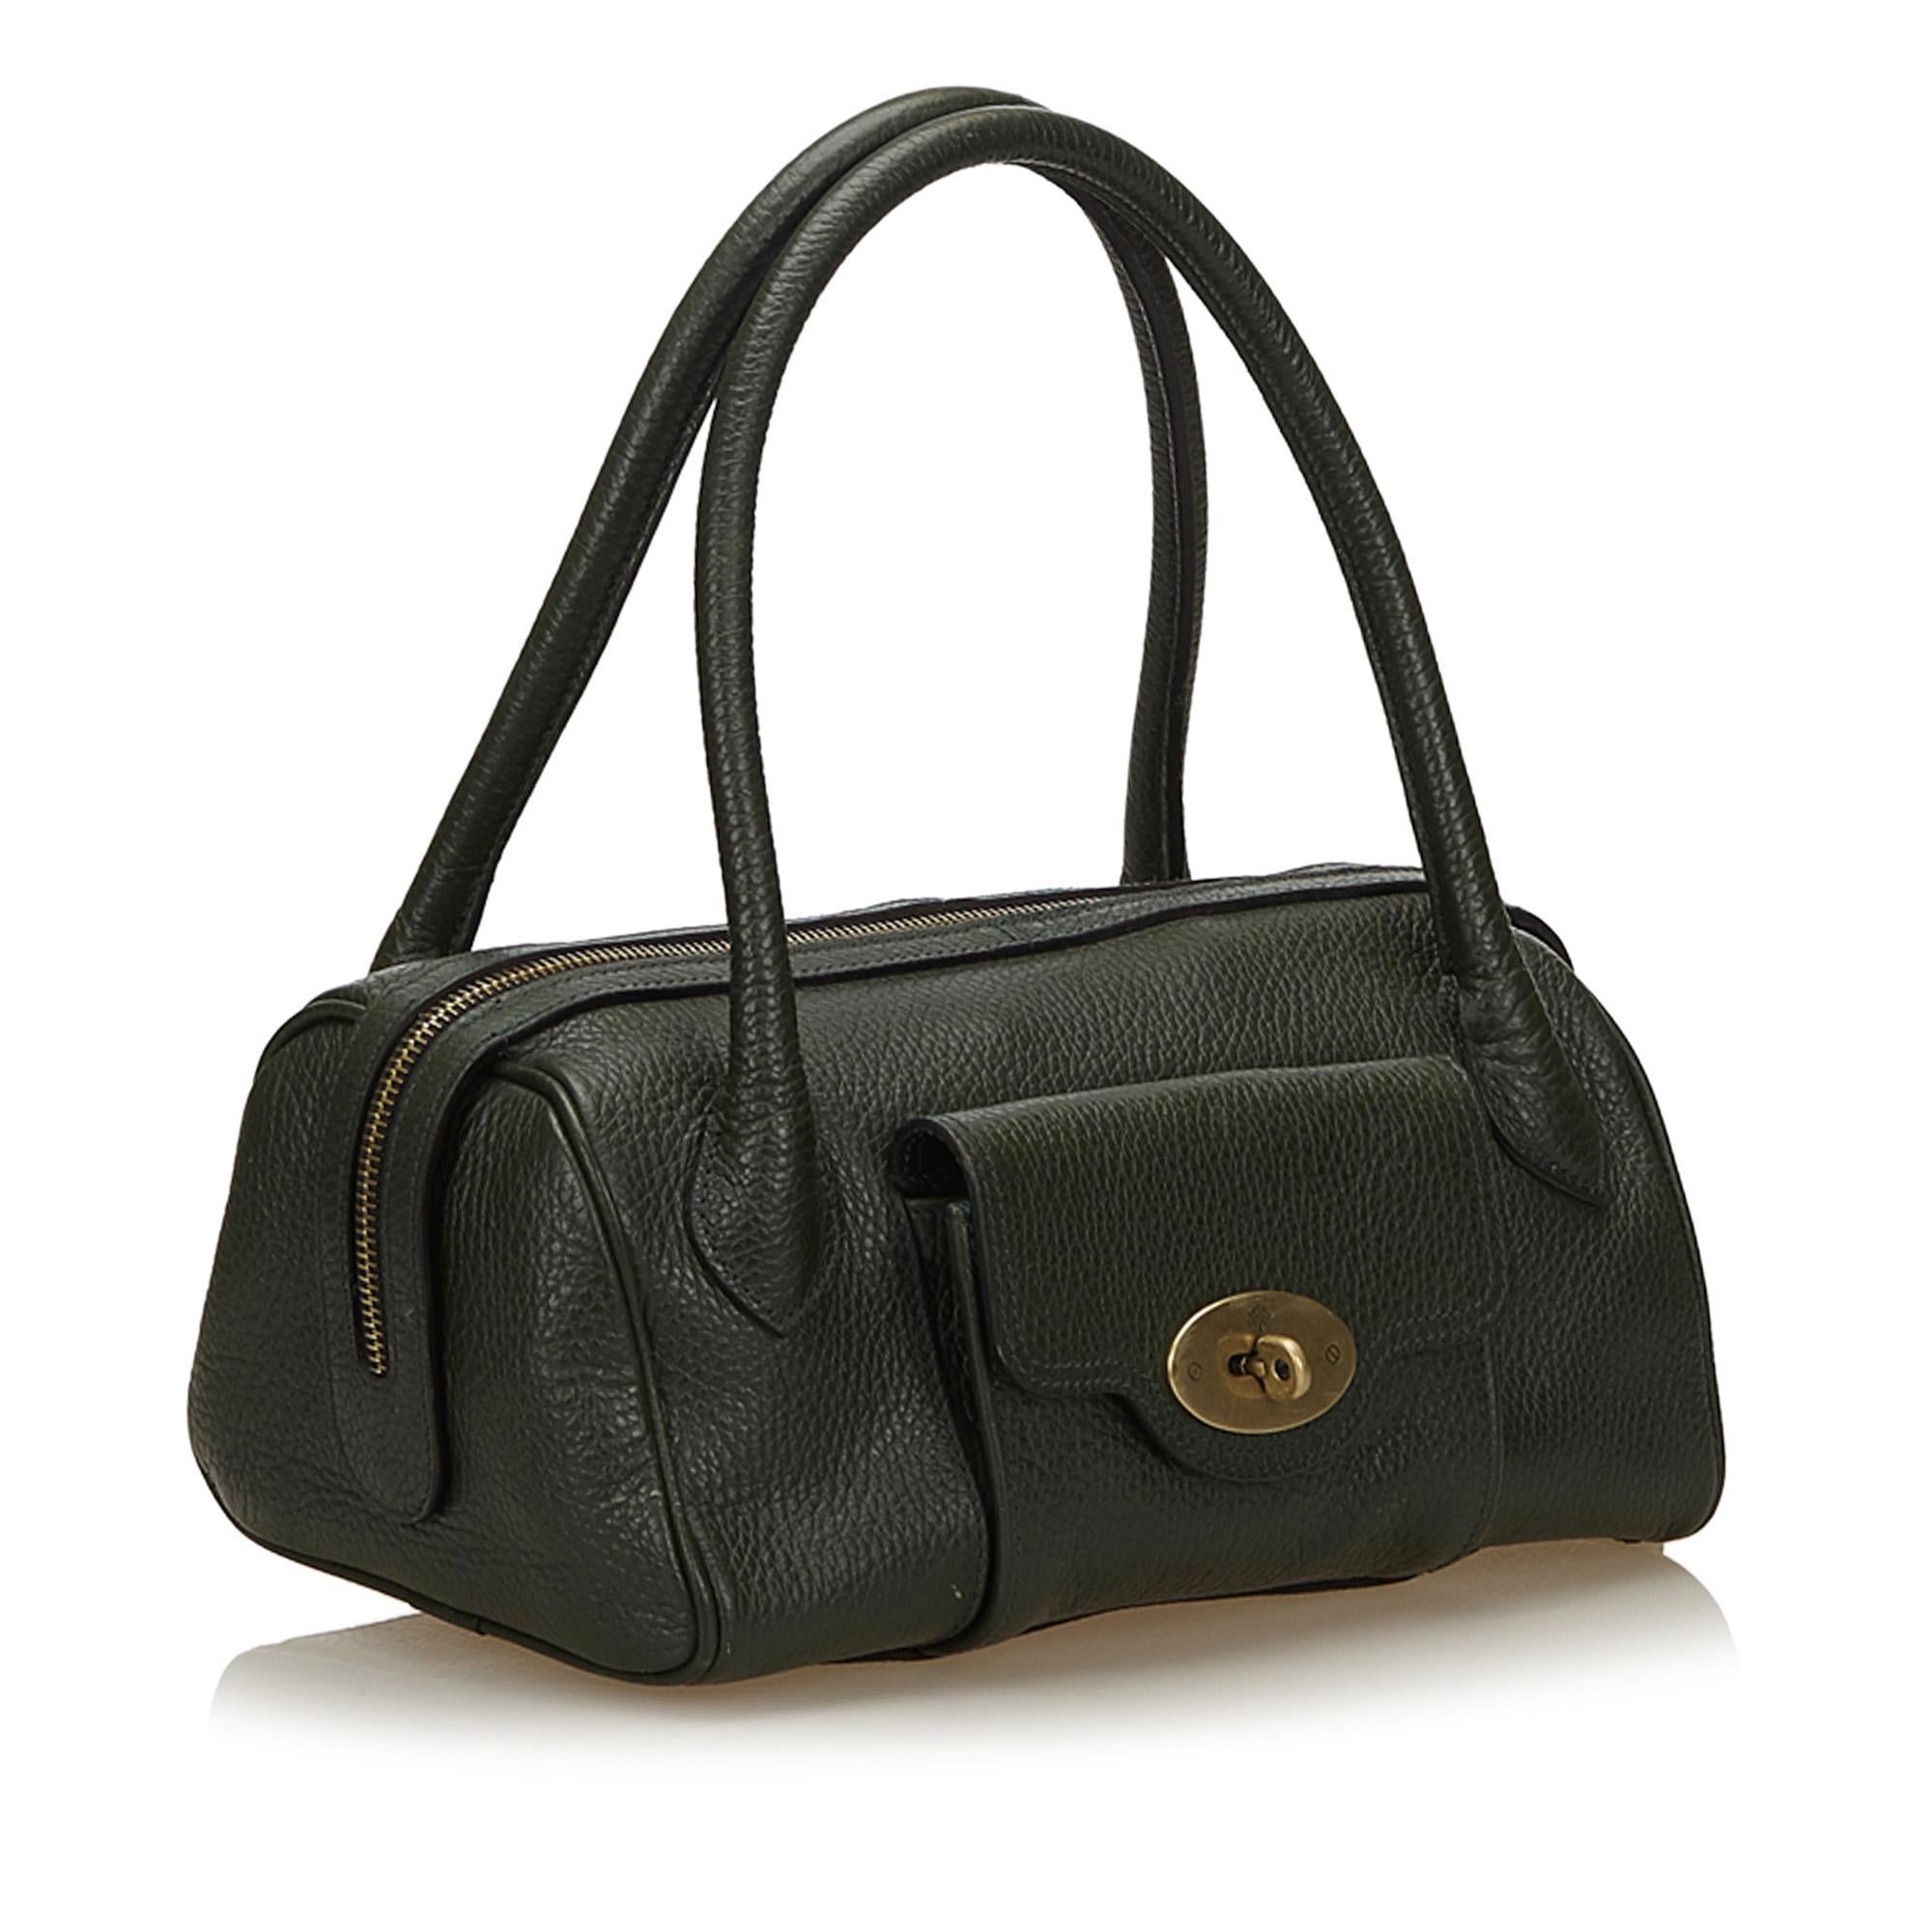 This handbag features a leather body, exterior front flap pocket with twist lock closure, rolled leather handles, top zip closure, and interior zip pocket. It carries as B+ condition rating.

Inclusions: 
This item does not come with